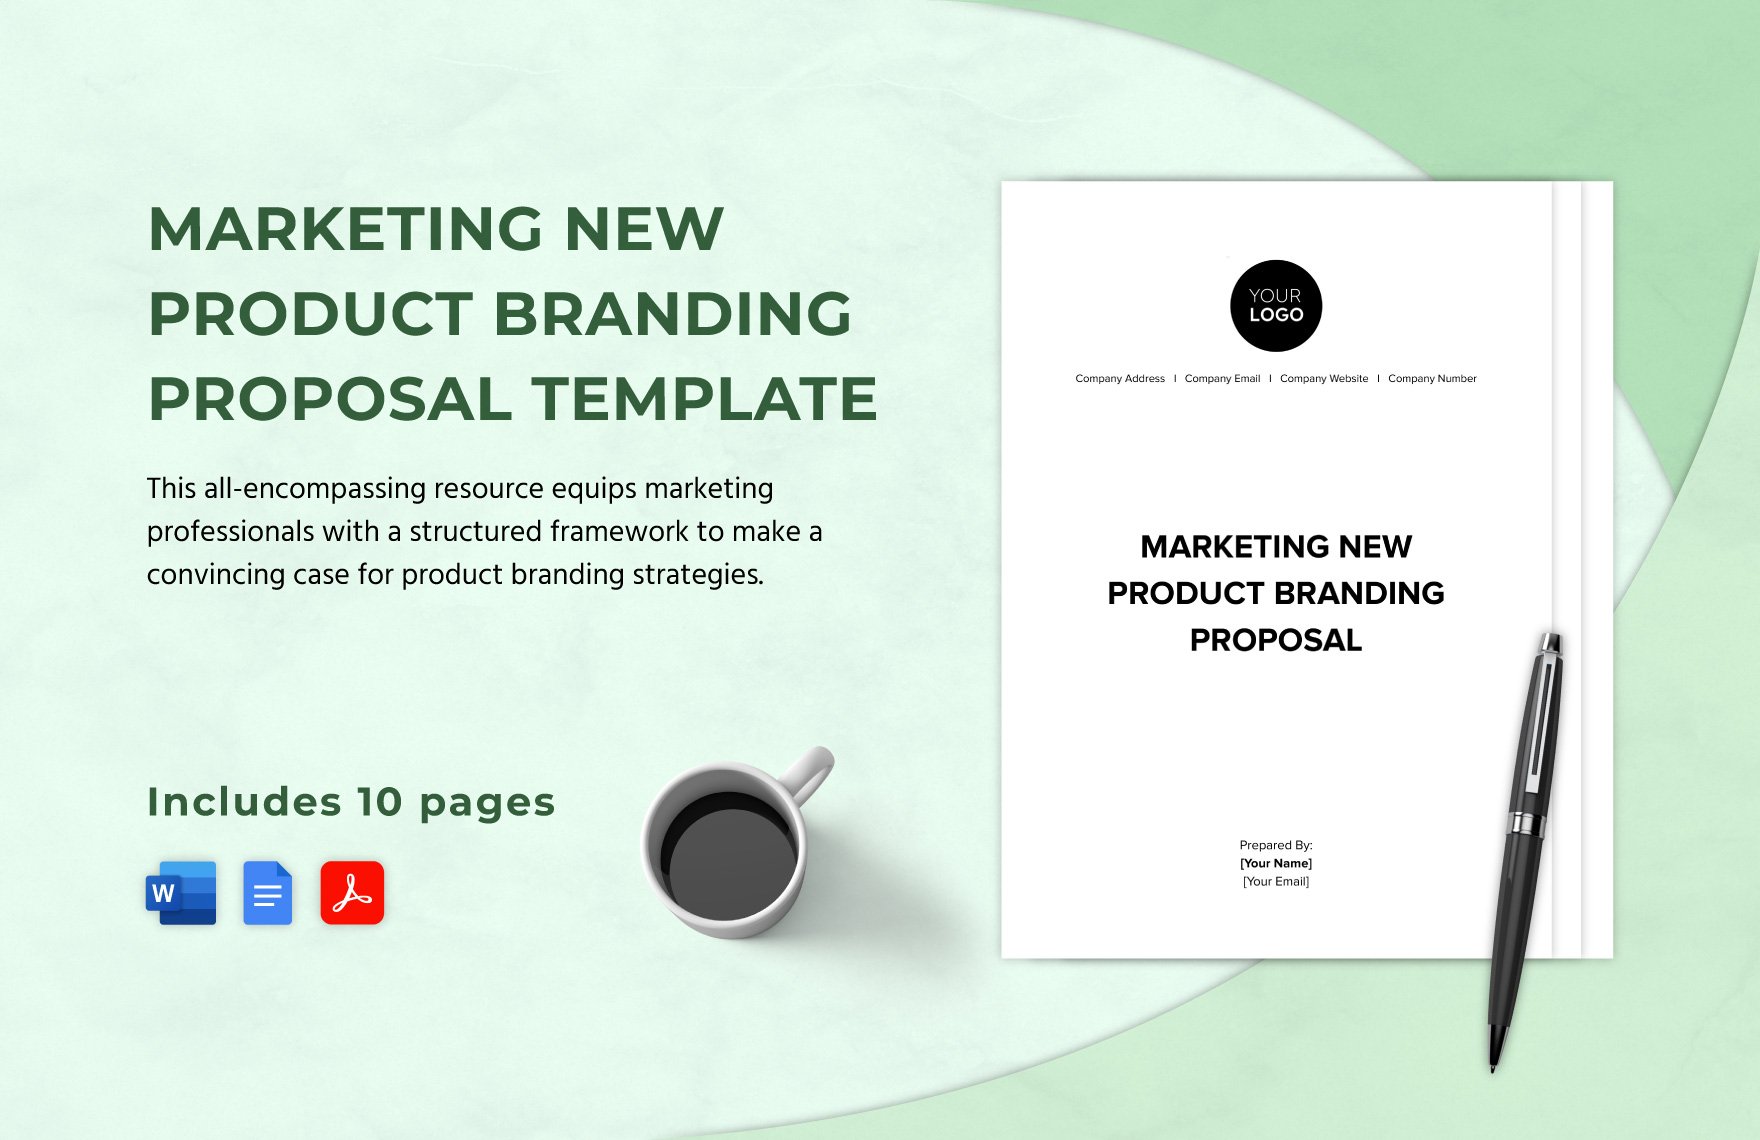 Marketing New Product Branding Proposal Template